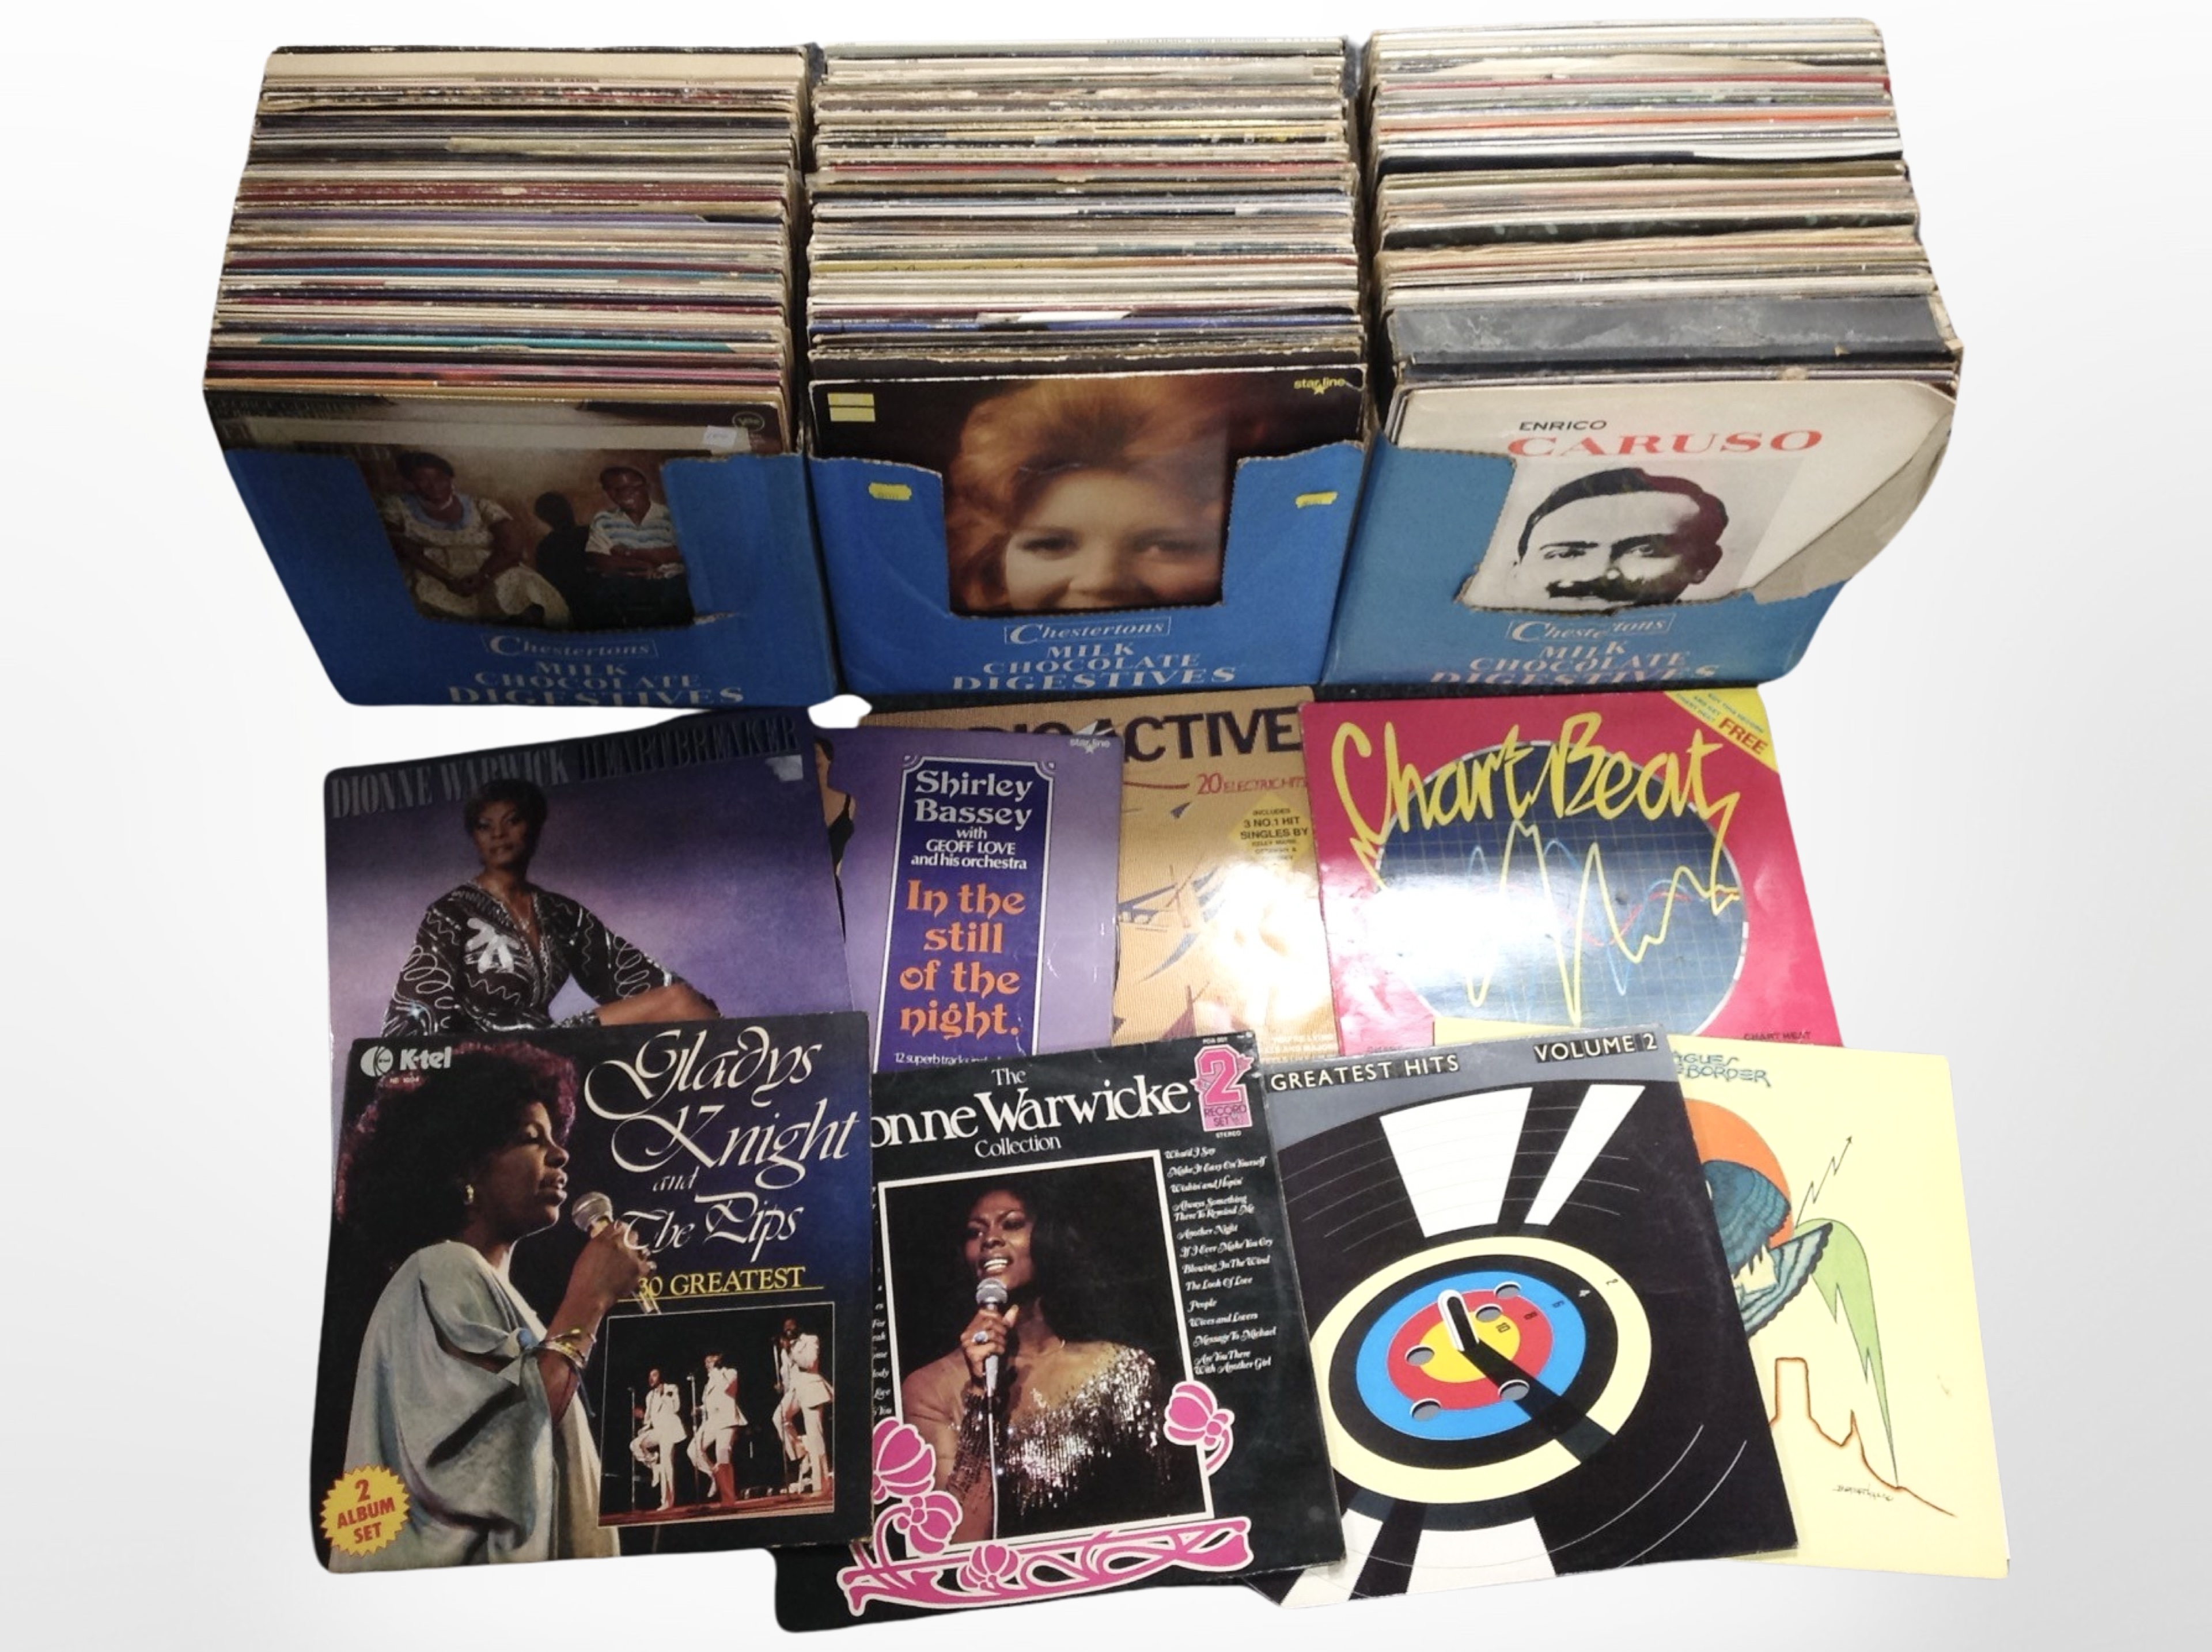 Three boxes of assorted LP records including Eurythmics, Shirley Bassey, Rick Astley,